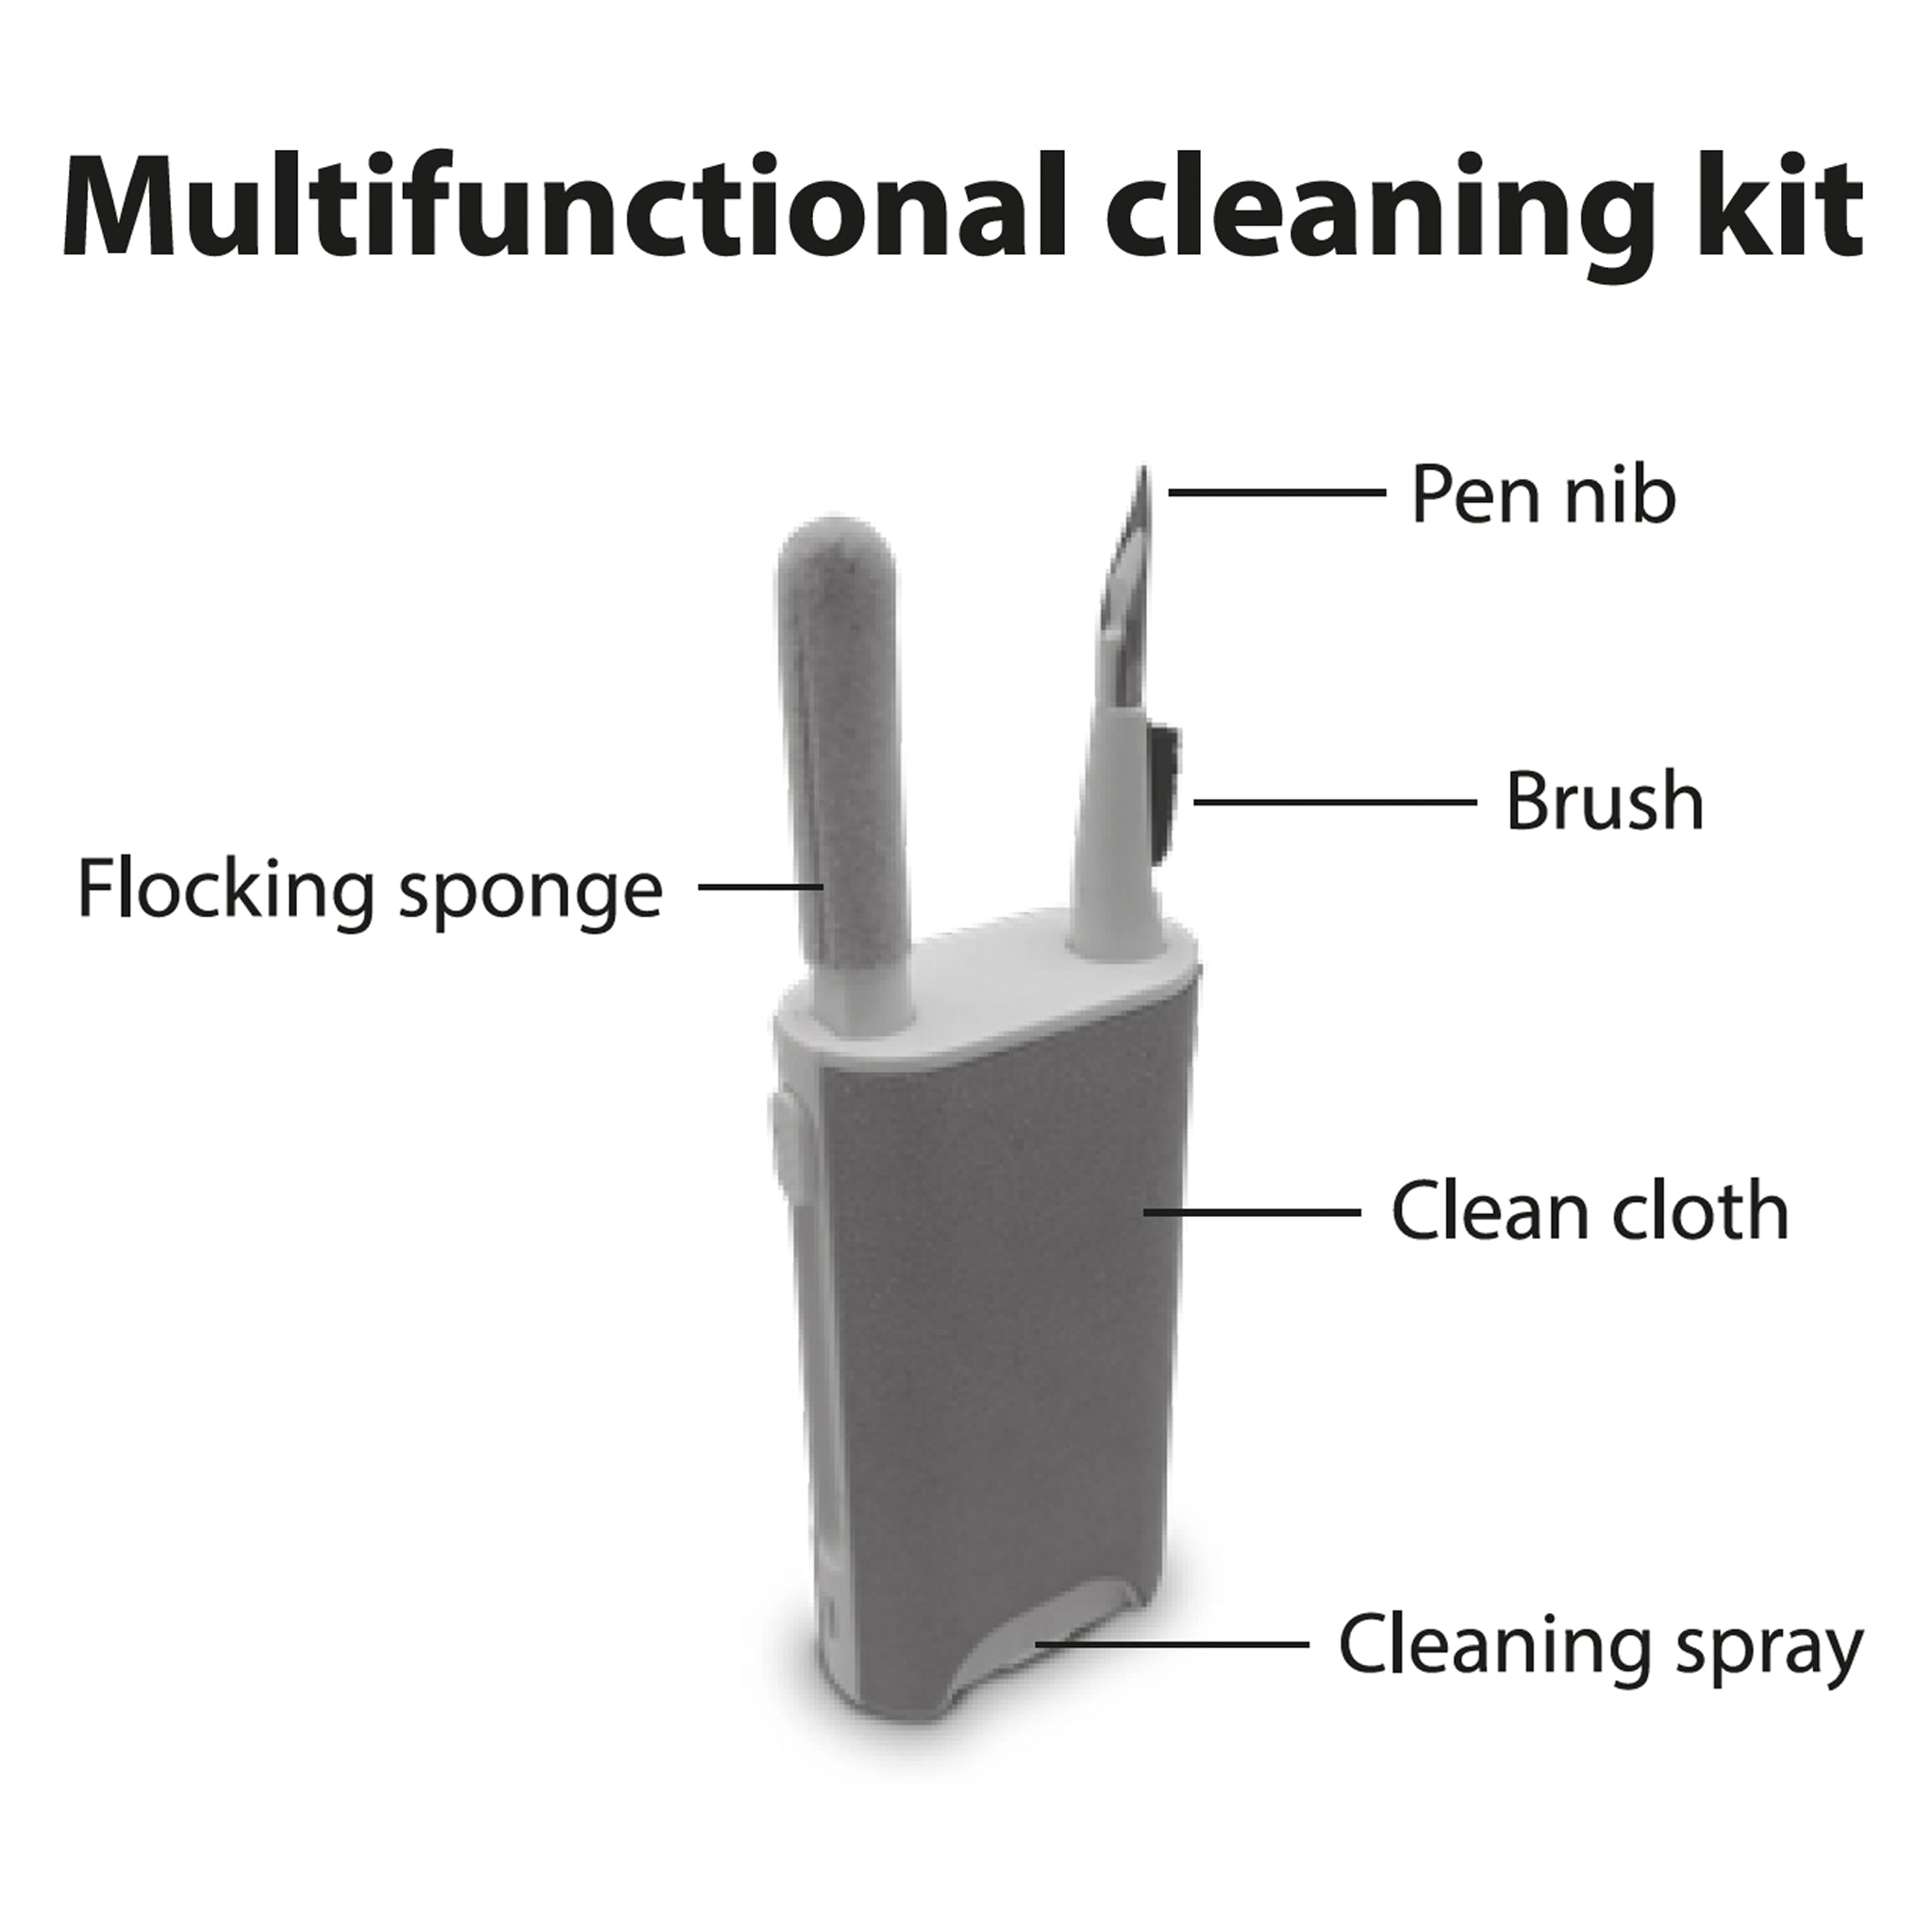 HA-NP35T-A multifunctional cleaning kit